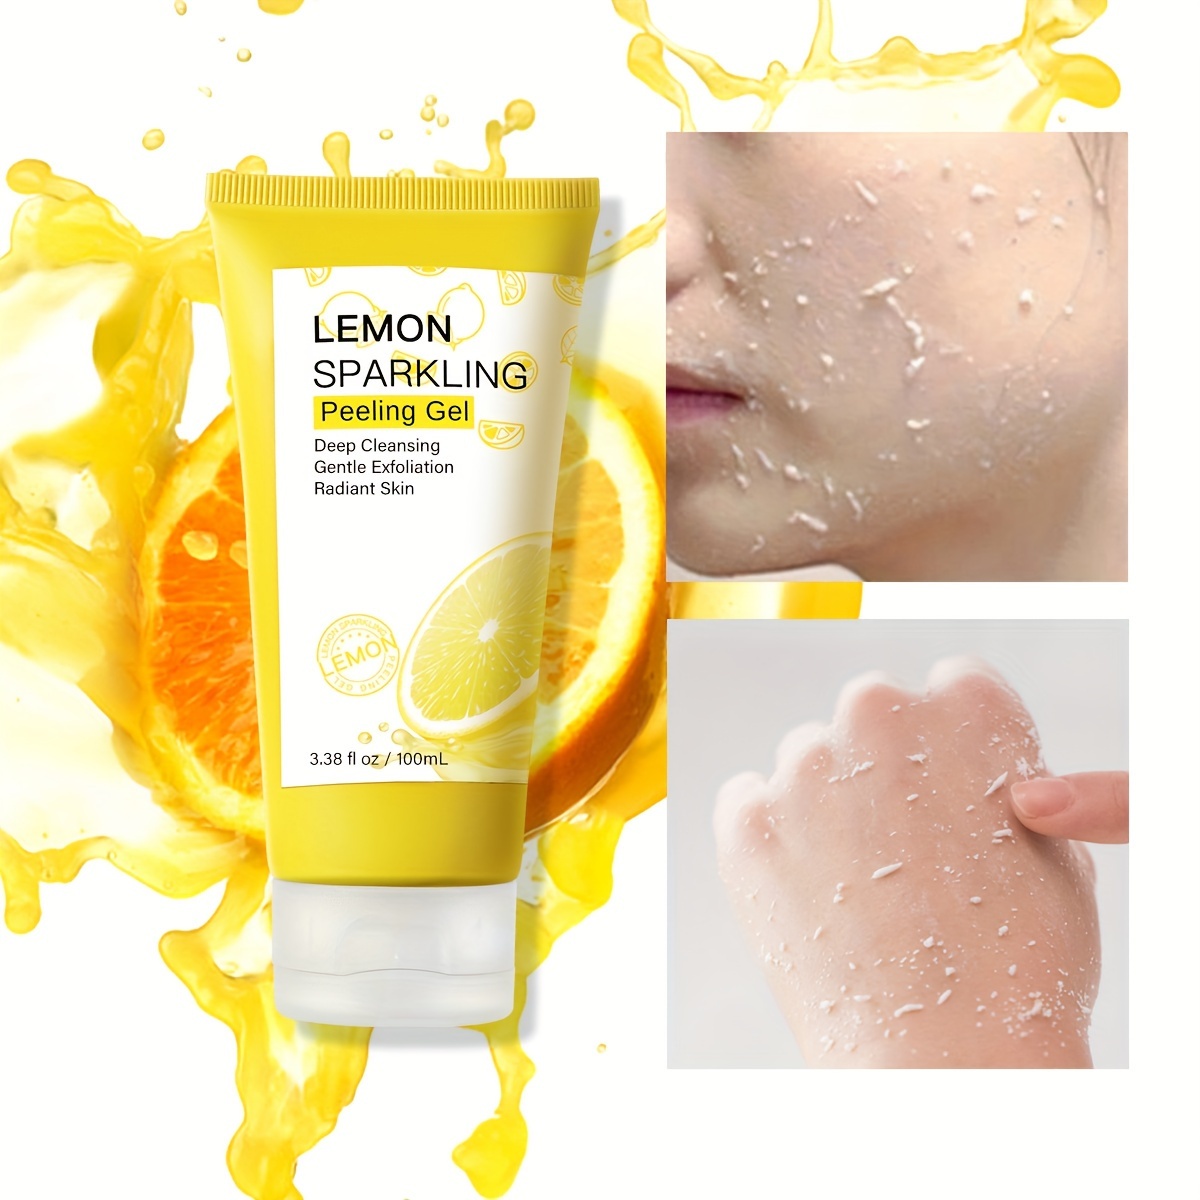 

Lemon Sparkling Peeling Gel, 3.38 Oz (100ml), With Citrus Limon Extract, Deep Cleansing, Moisturizing, Exfoliating Gel, Suitable For Acne-prone, Oily Skin, Unisex Use